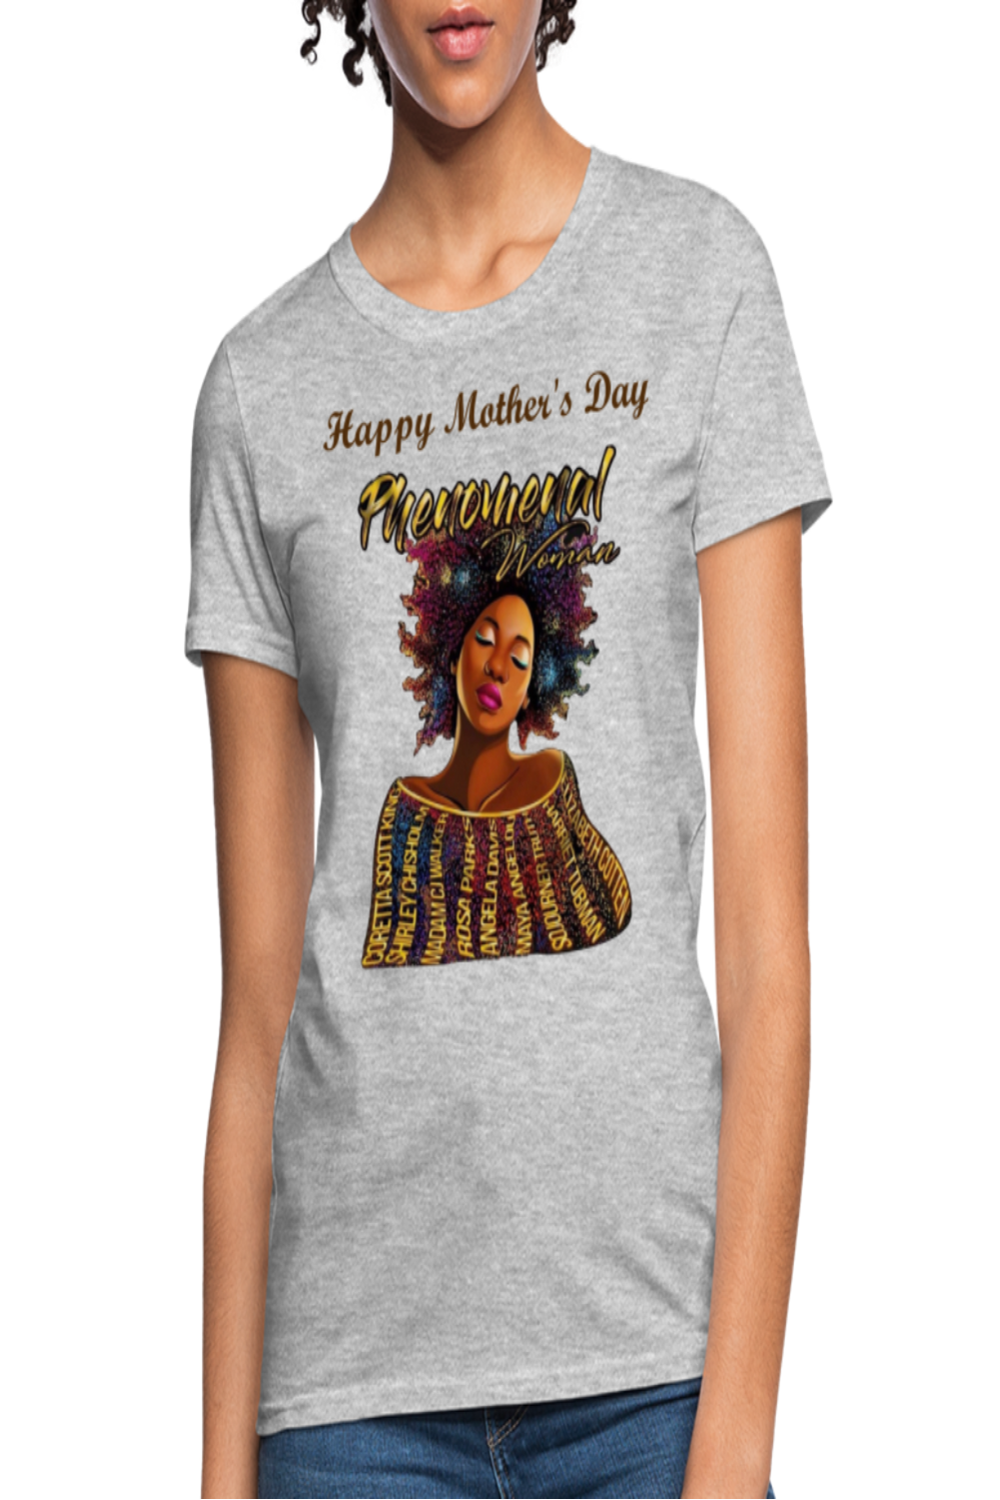 African American Women's Happy Mother's Day Woman Short Sleeve T-Shirt - heather gray - NicholesGifts.online